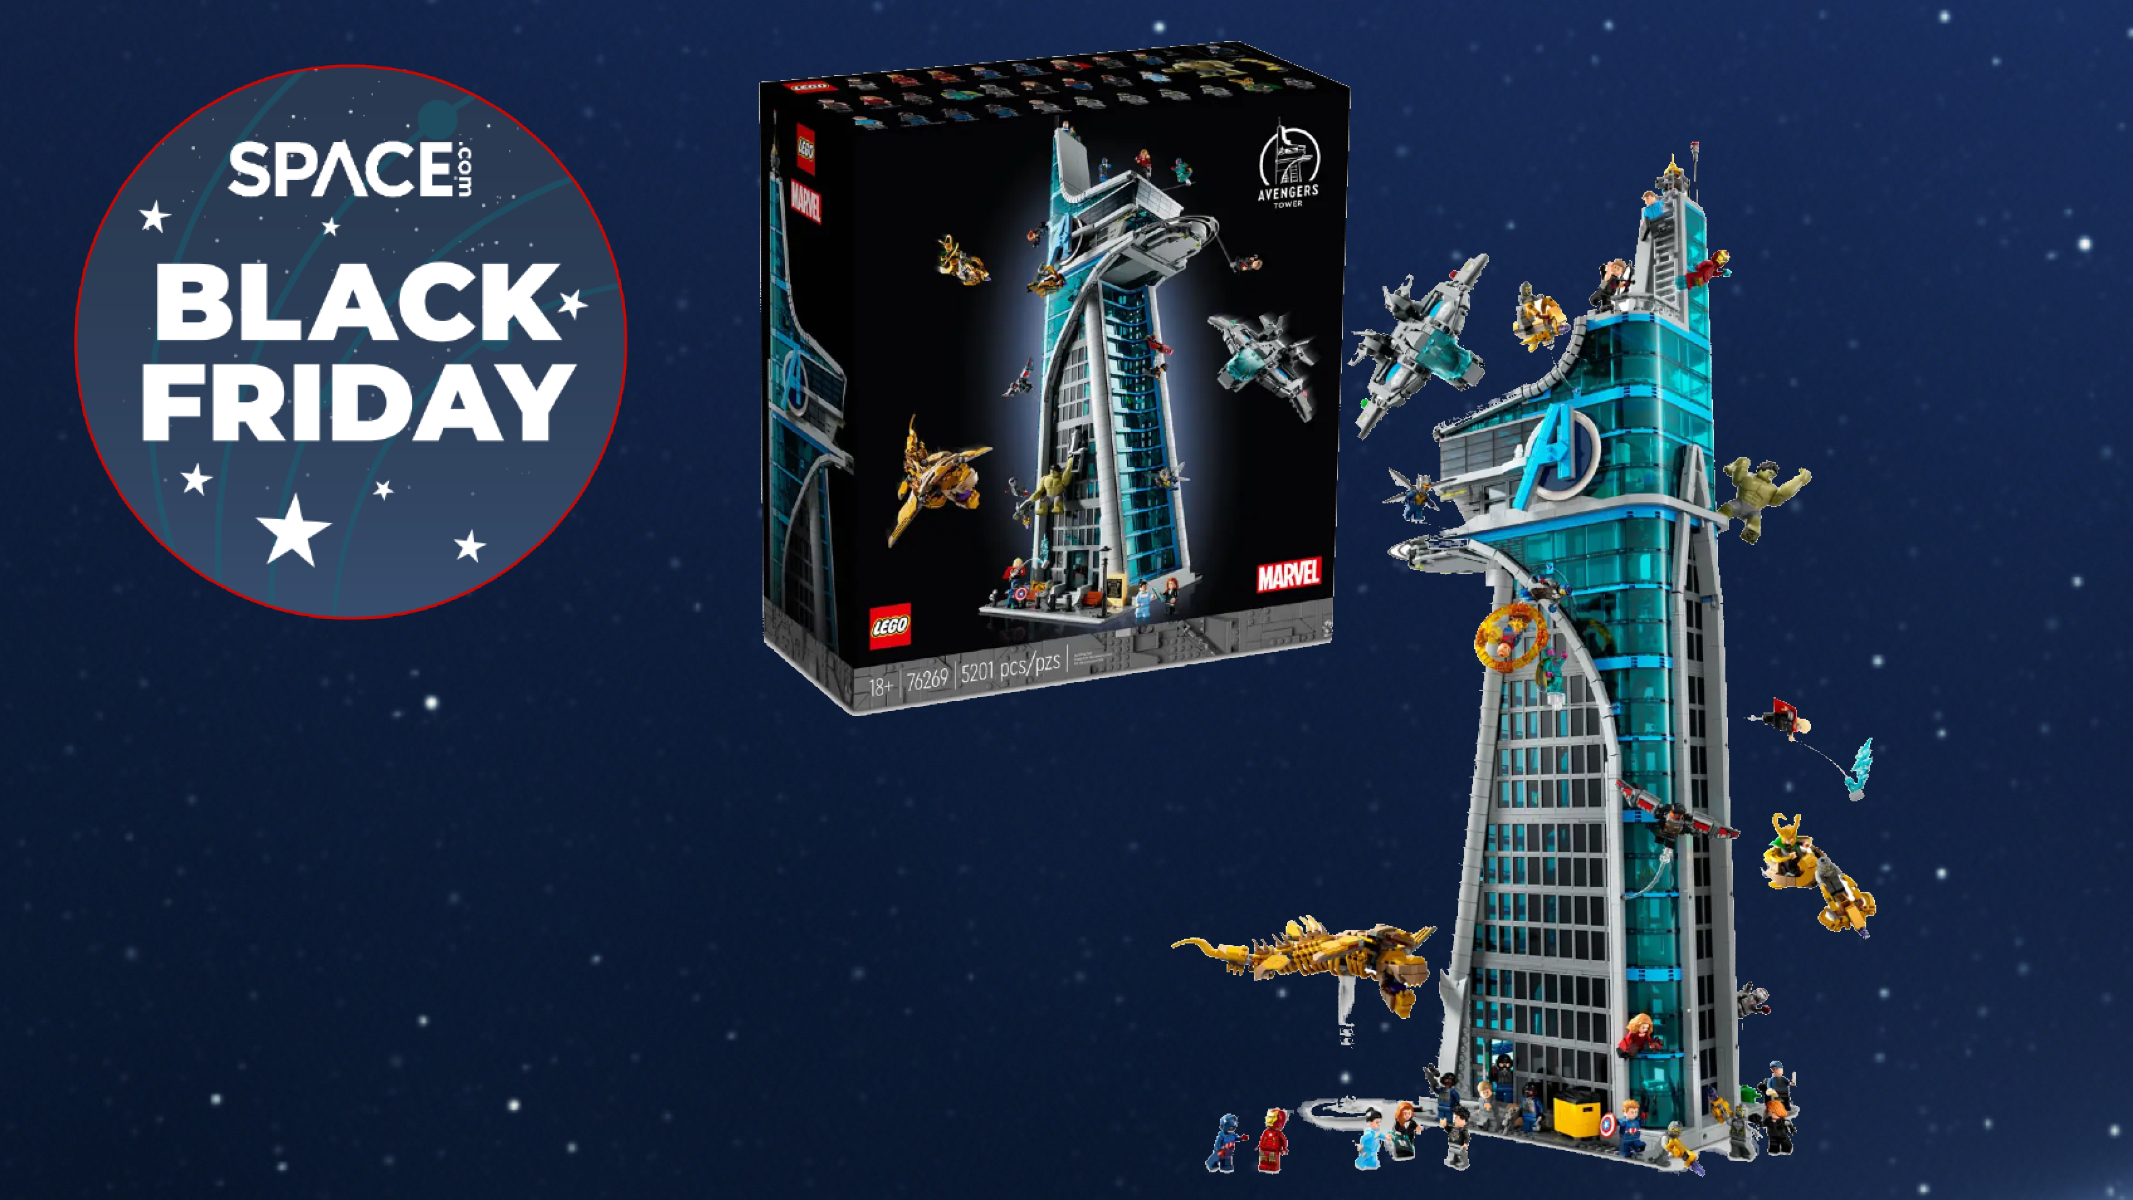 Lego and Marvel reveal $500 Avengers Tower set, coming soon - Polygon